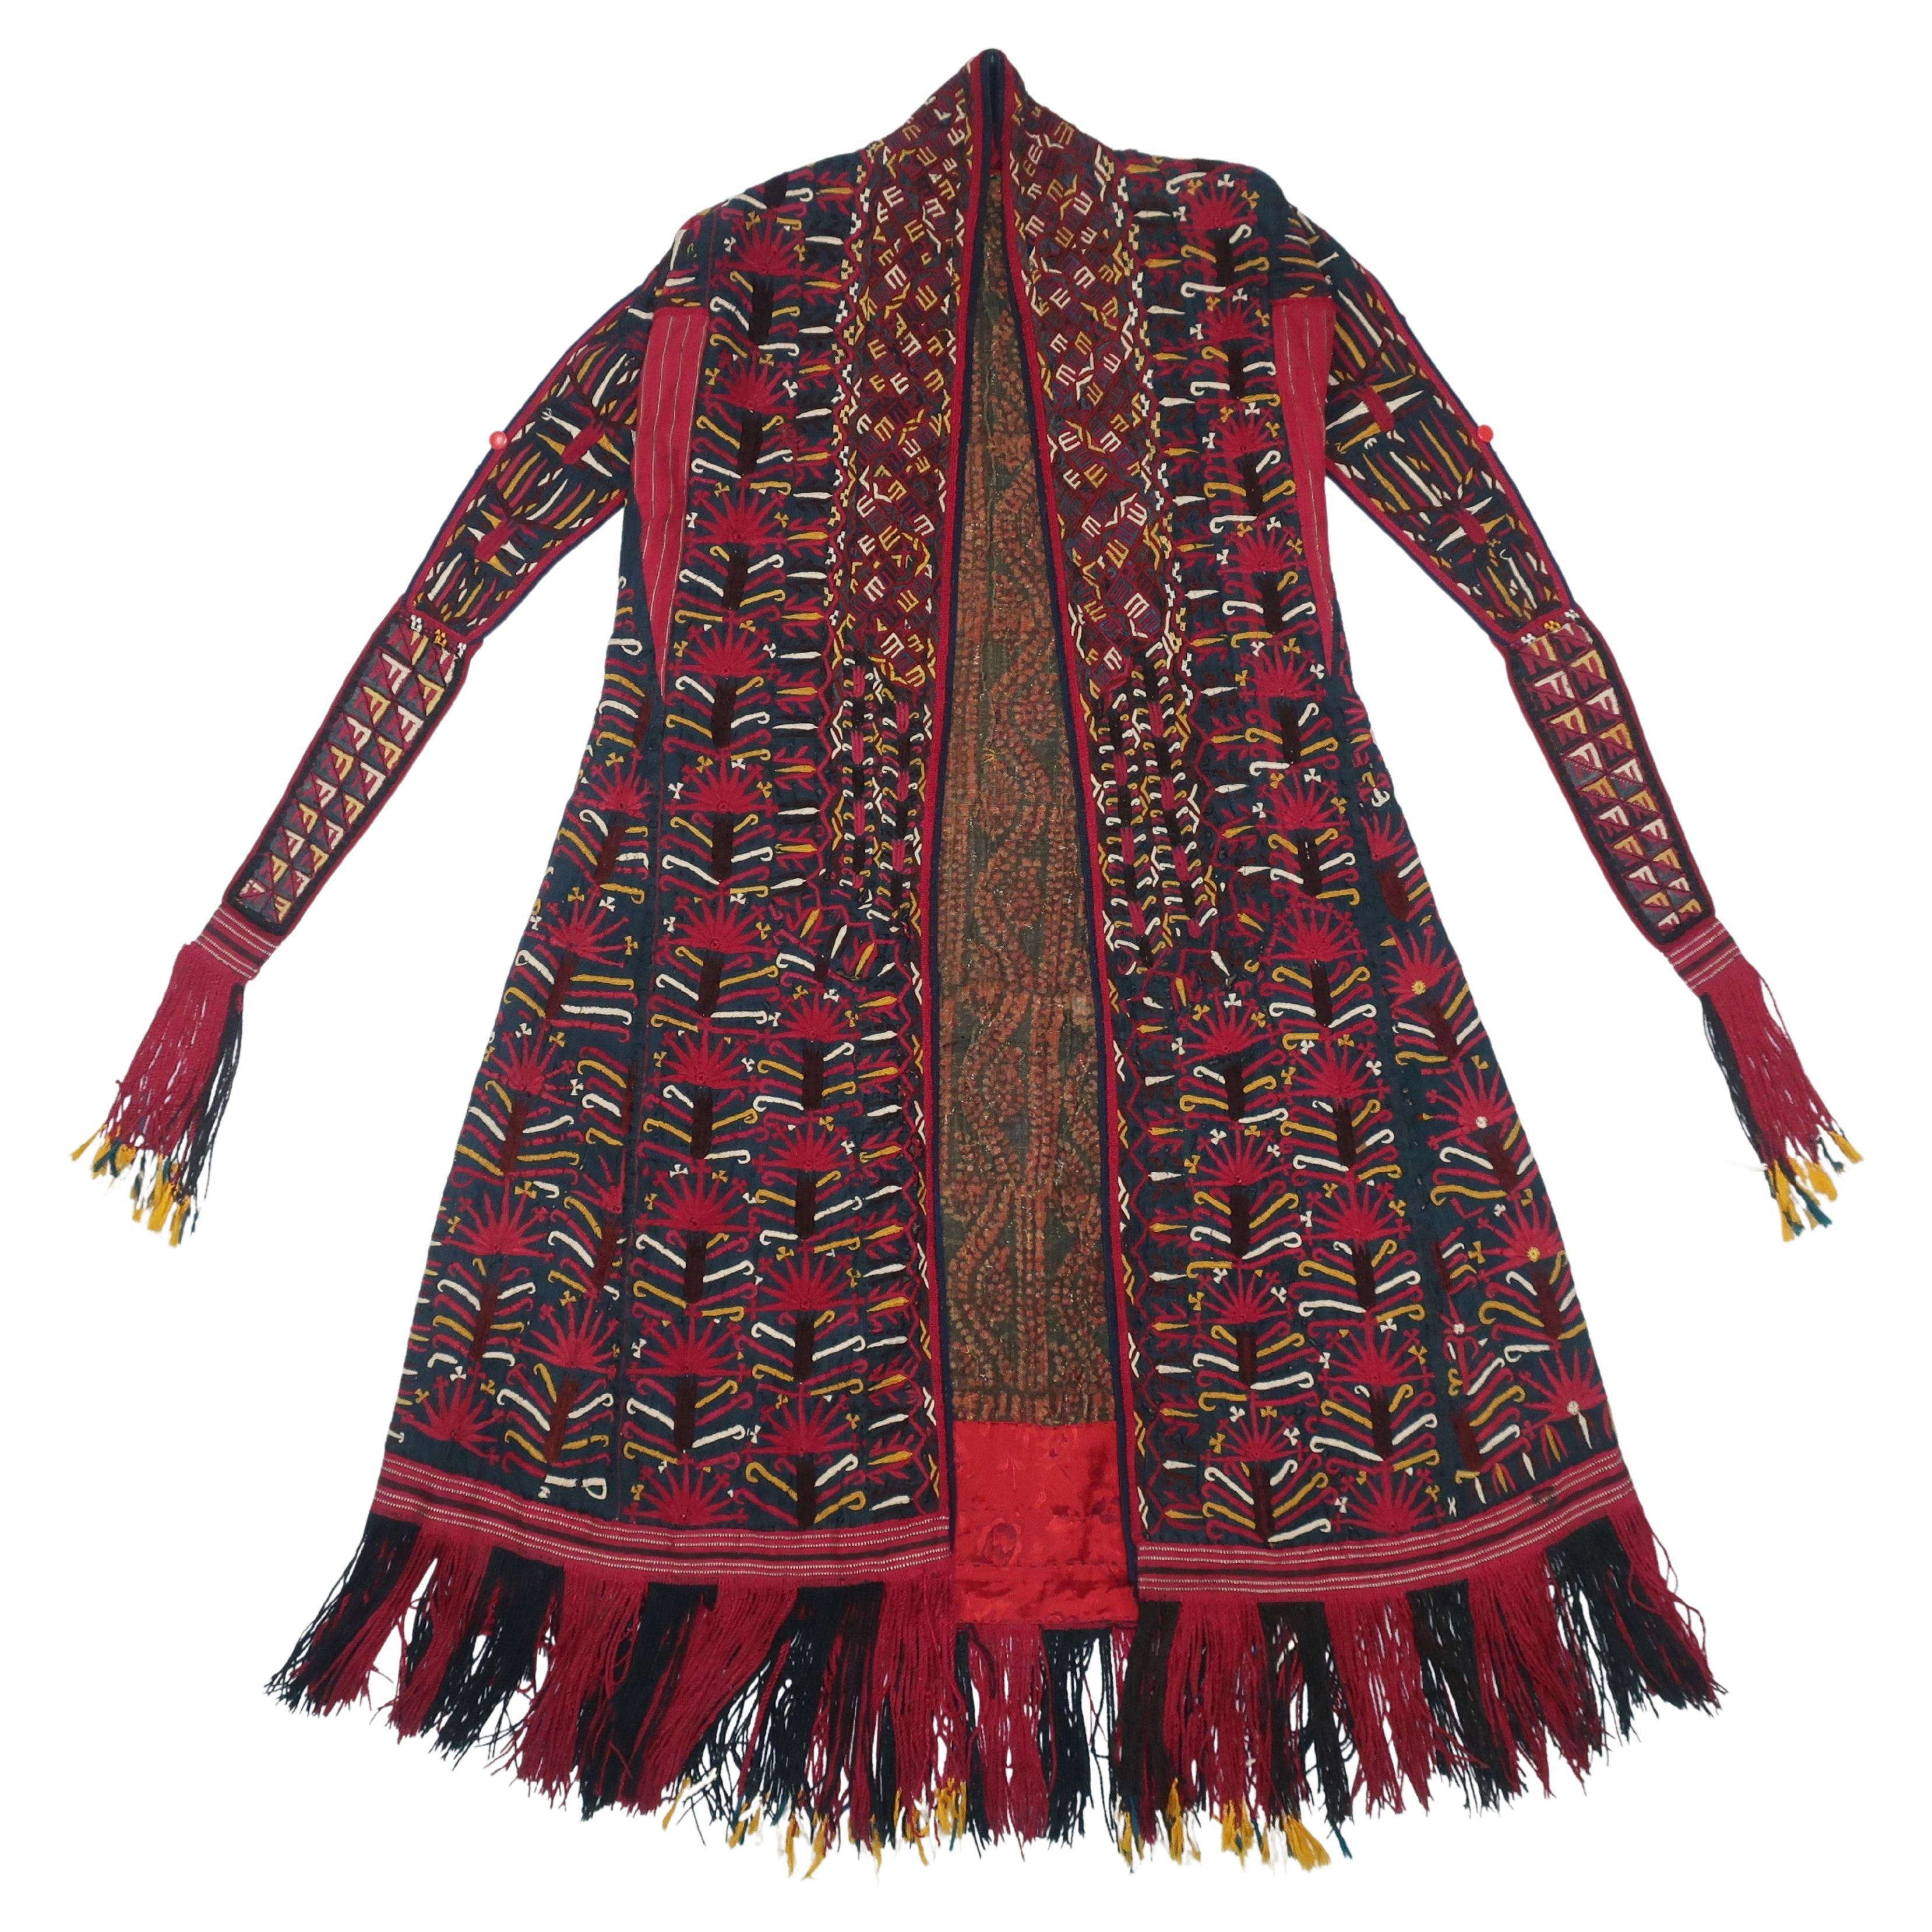 19th Century Central Asian Embroidered Chyrpy Mantle Cloak For Sale